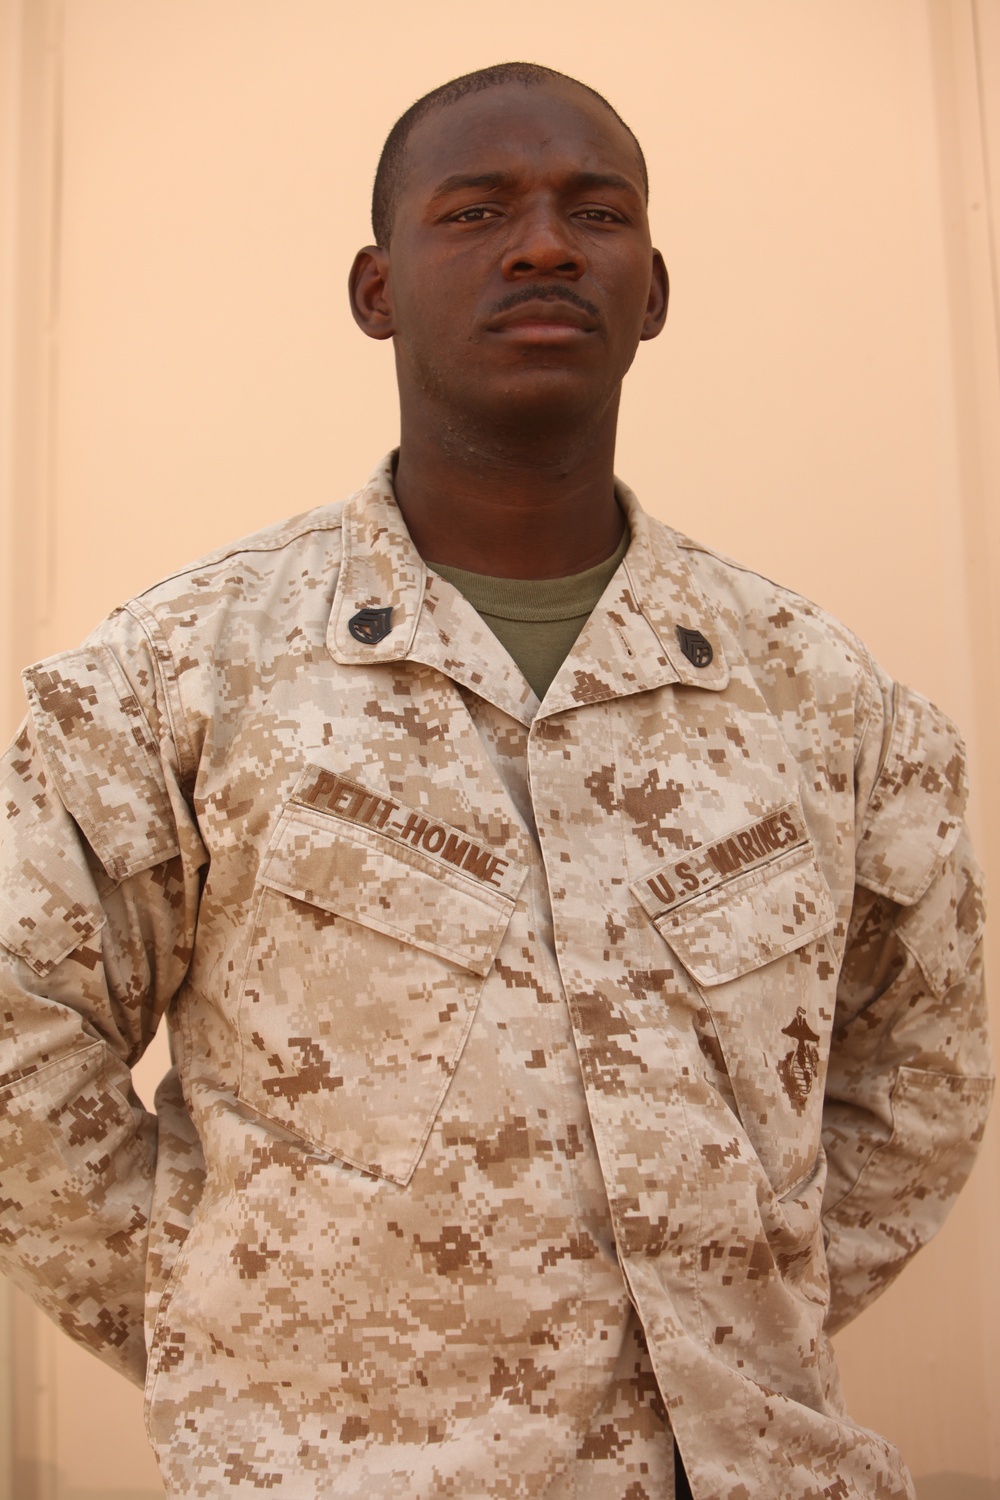 Marine advisor builds relations with Afghans, strengthens partnership through mentoring